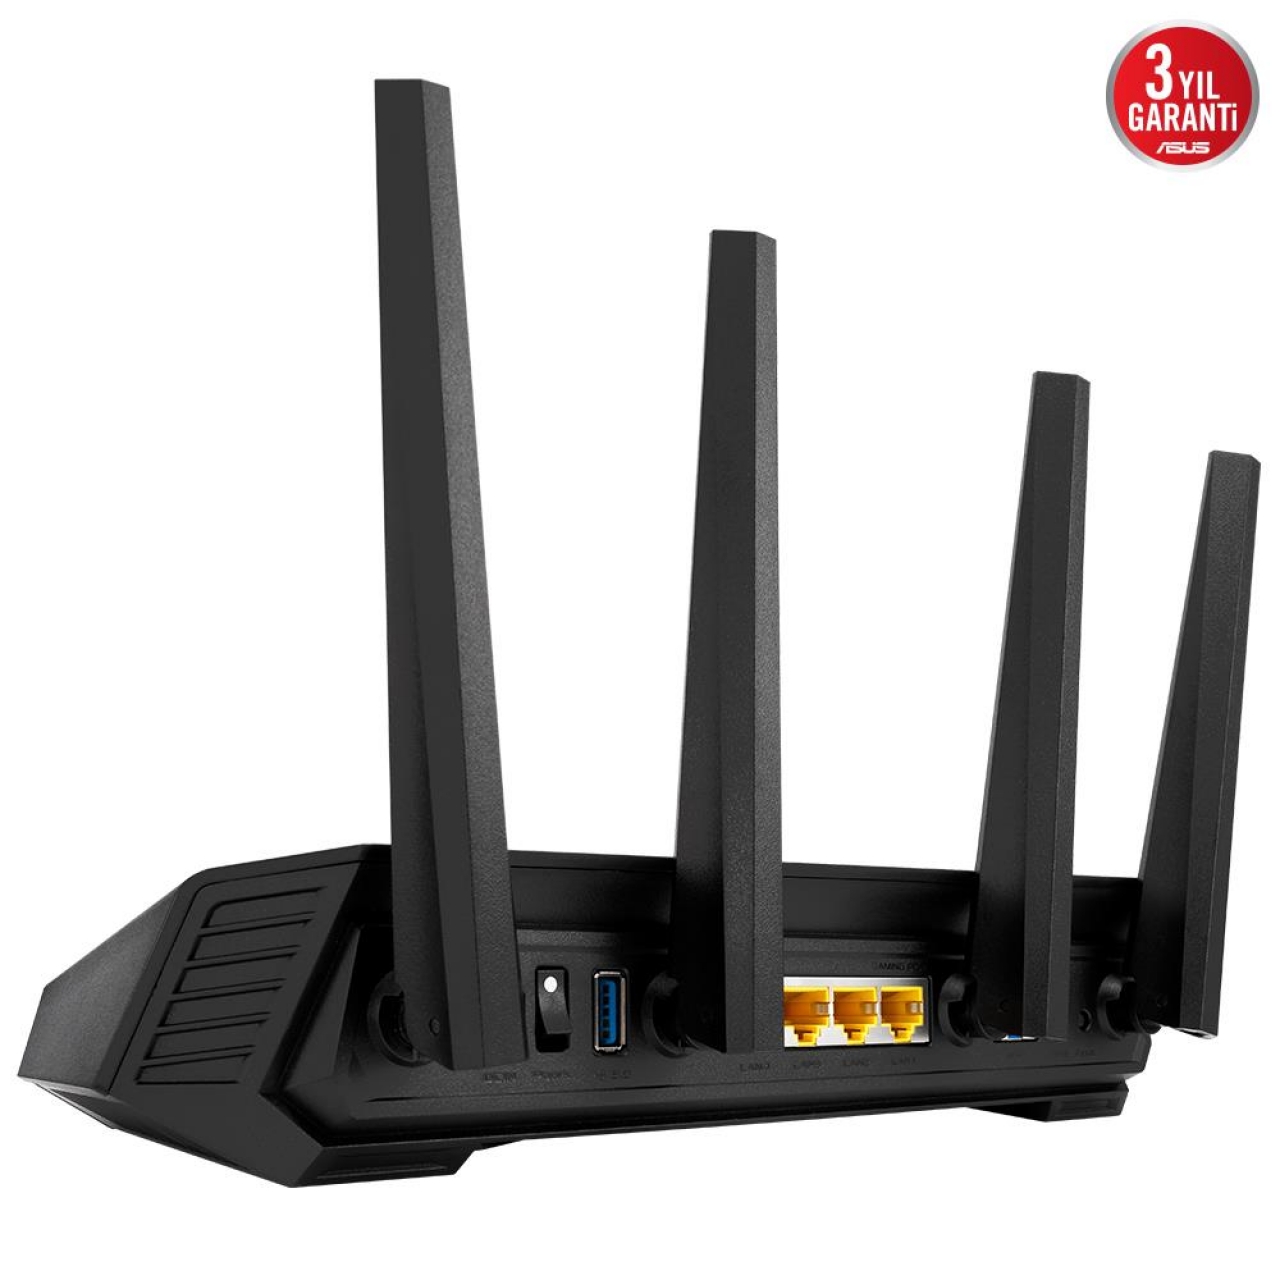 ASUS ROG STRIX GS-AX5400 WIFI-6 GAMING ROUTER